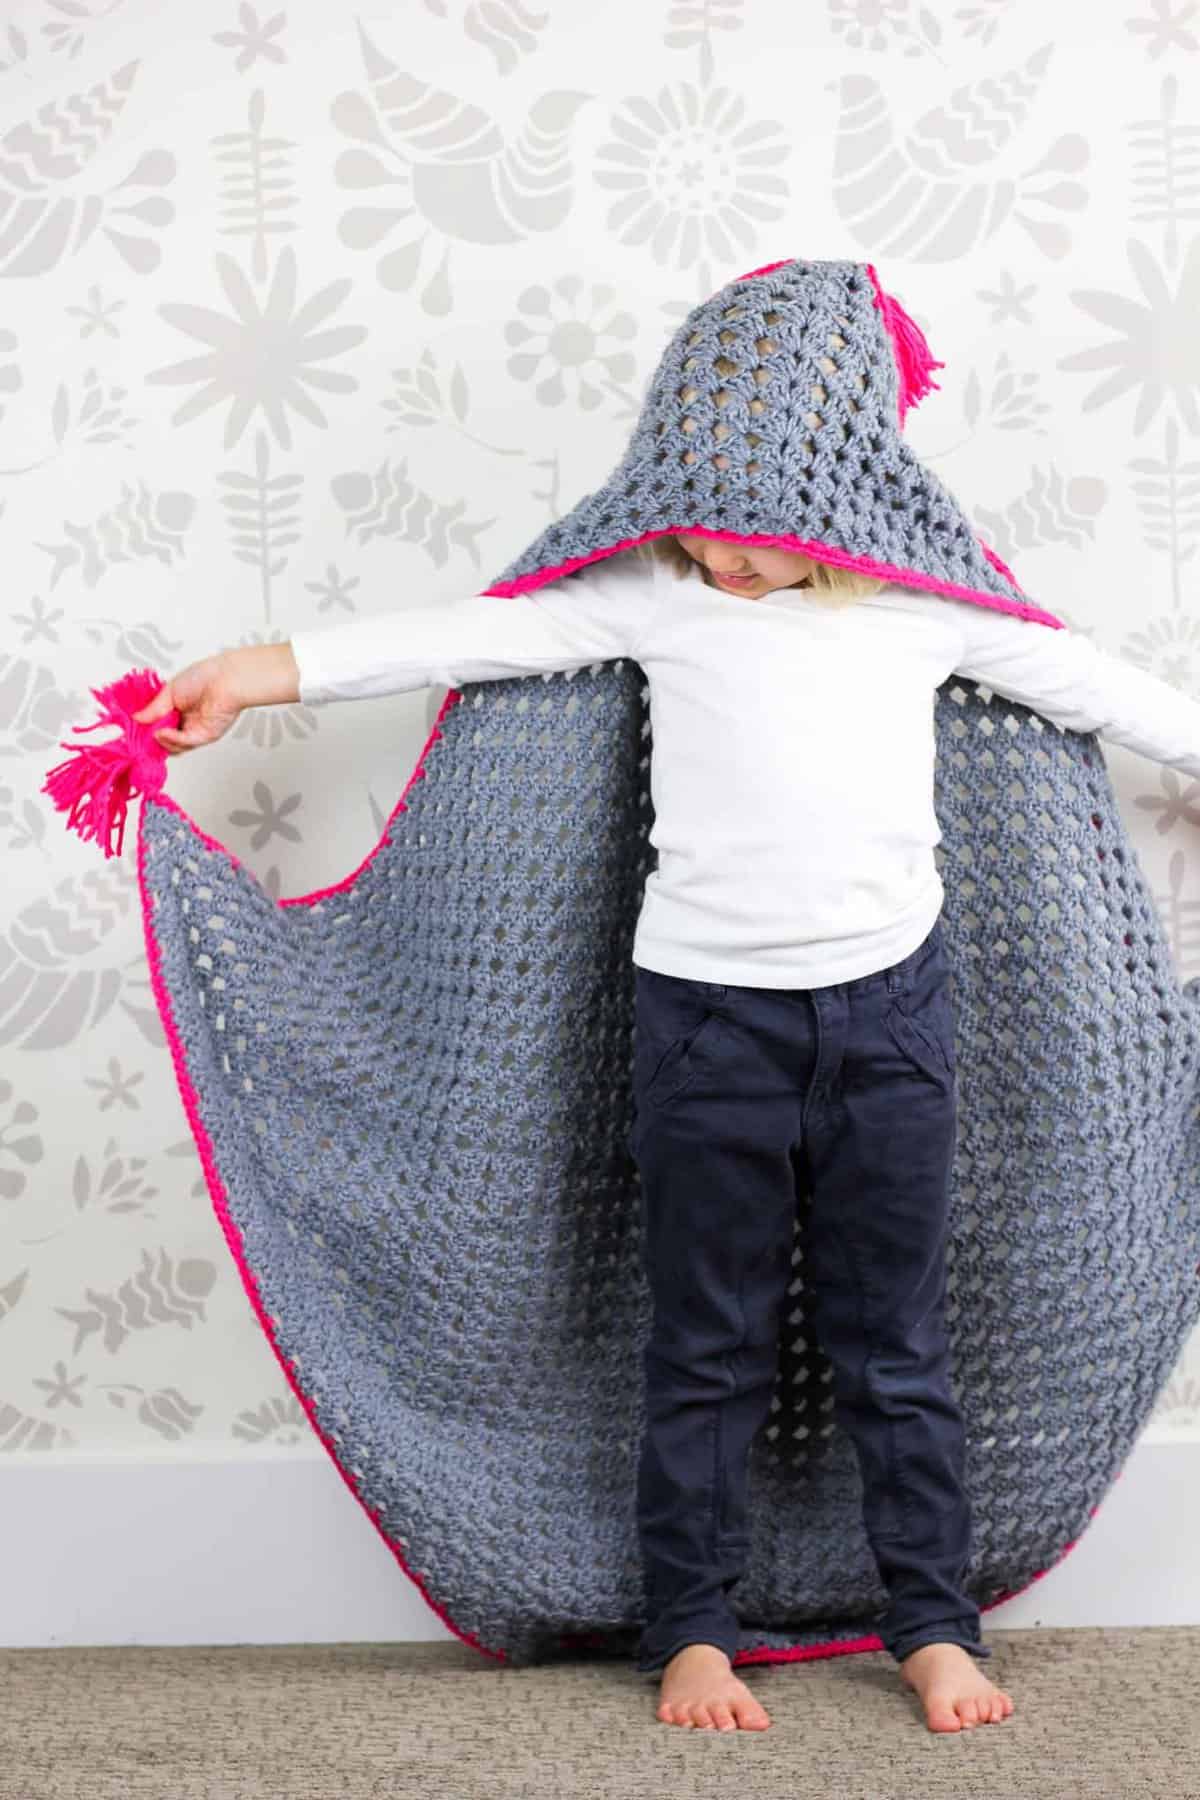 Based on a large granny square, the "Granny Gives Back" crochet hooded blanket pattern makes an easy and inexpensive project to donate to children's charities. Click to see a list of projects for crocheting and knitting for charity and where to donate them.